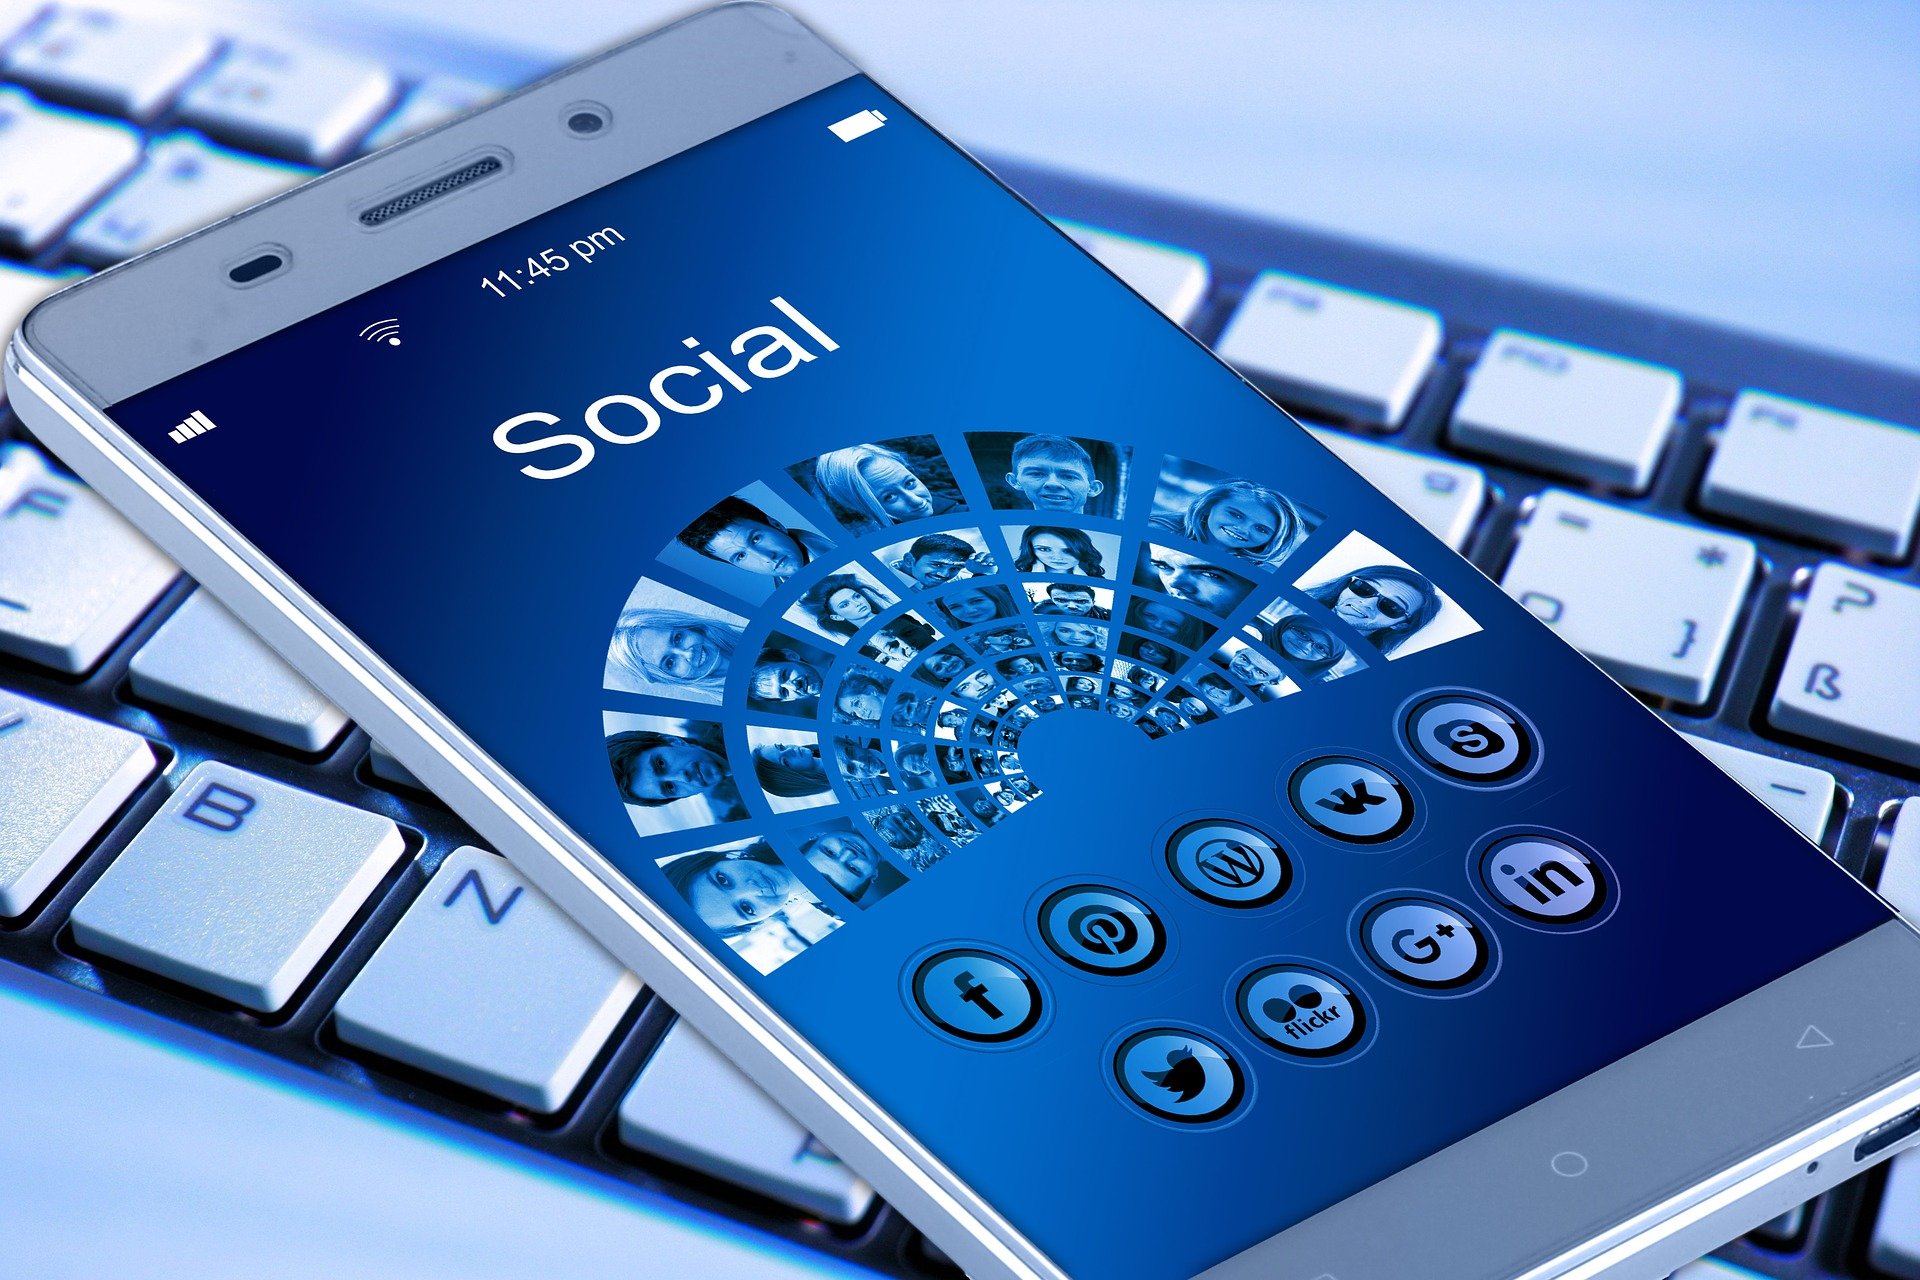 Social Media Marketing for small businesses